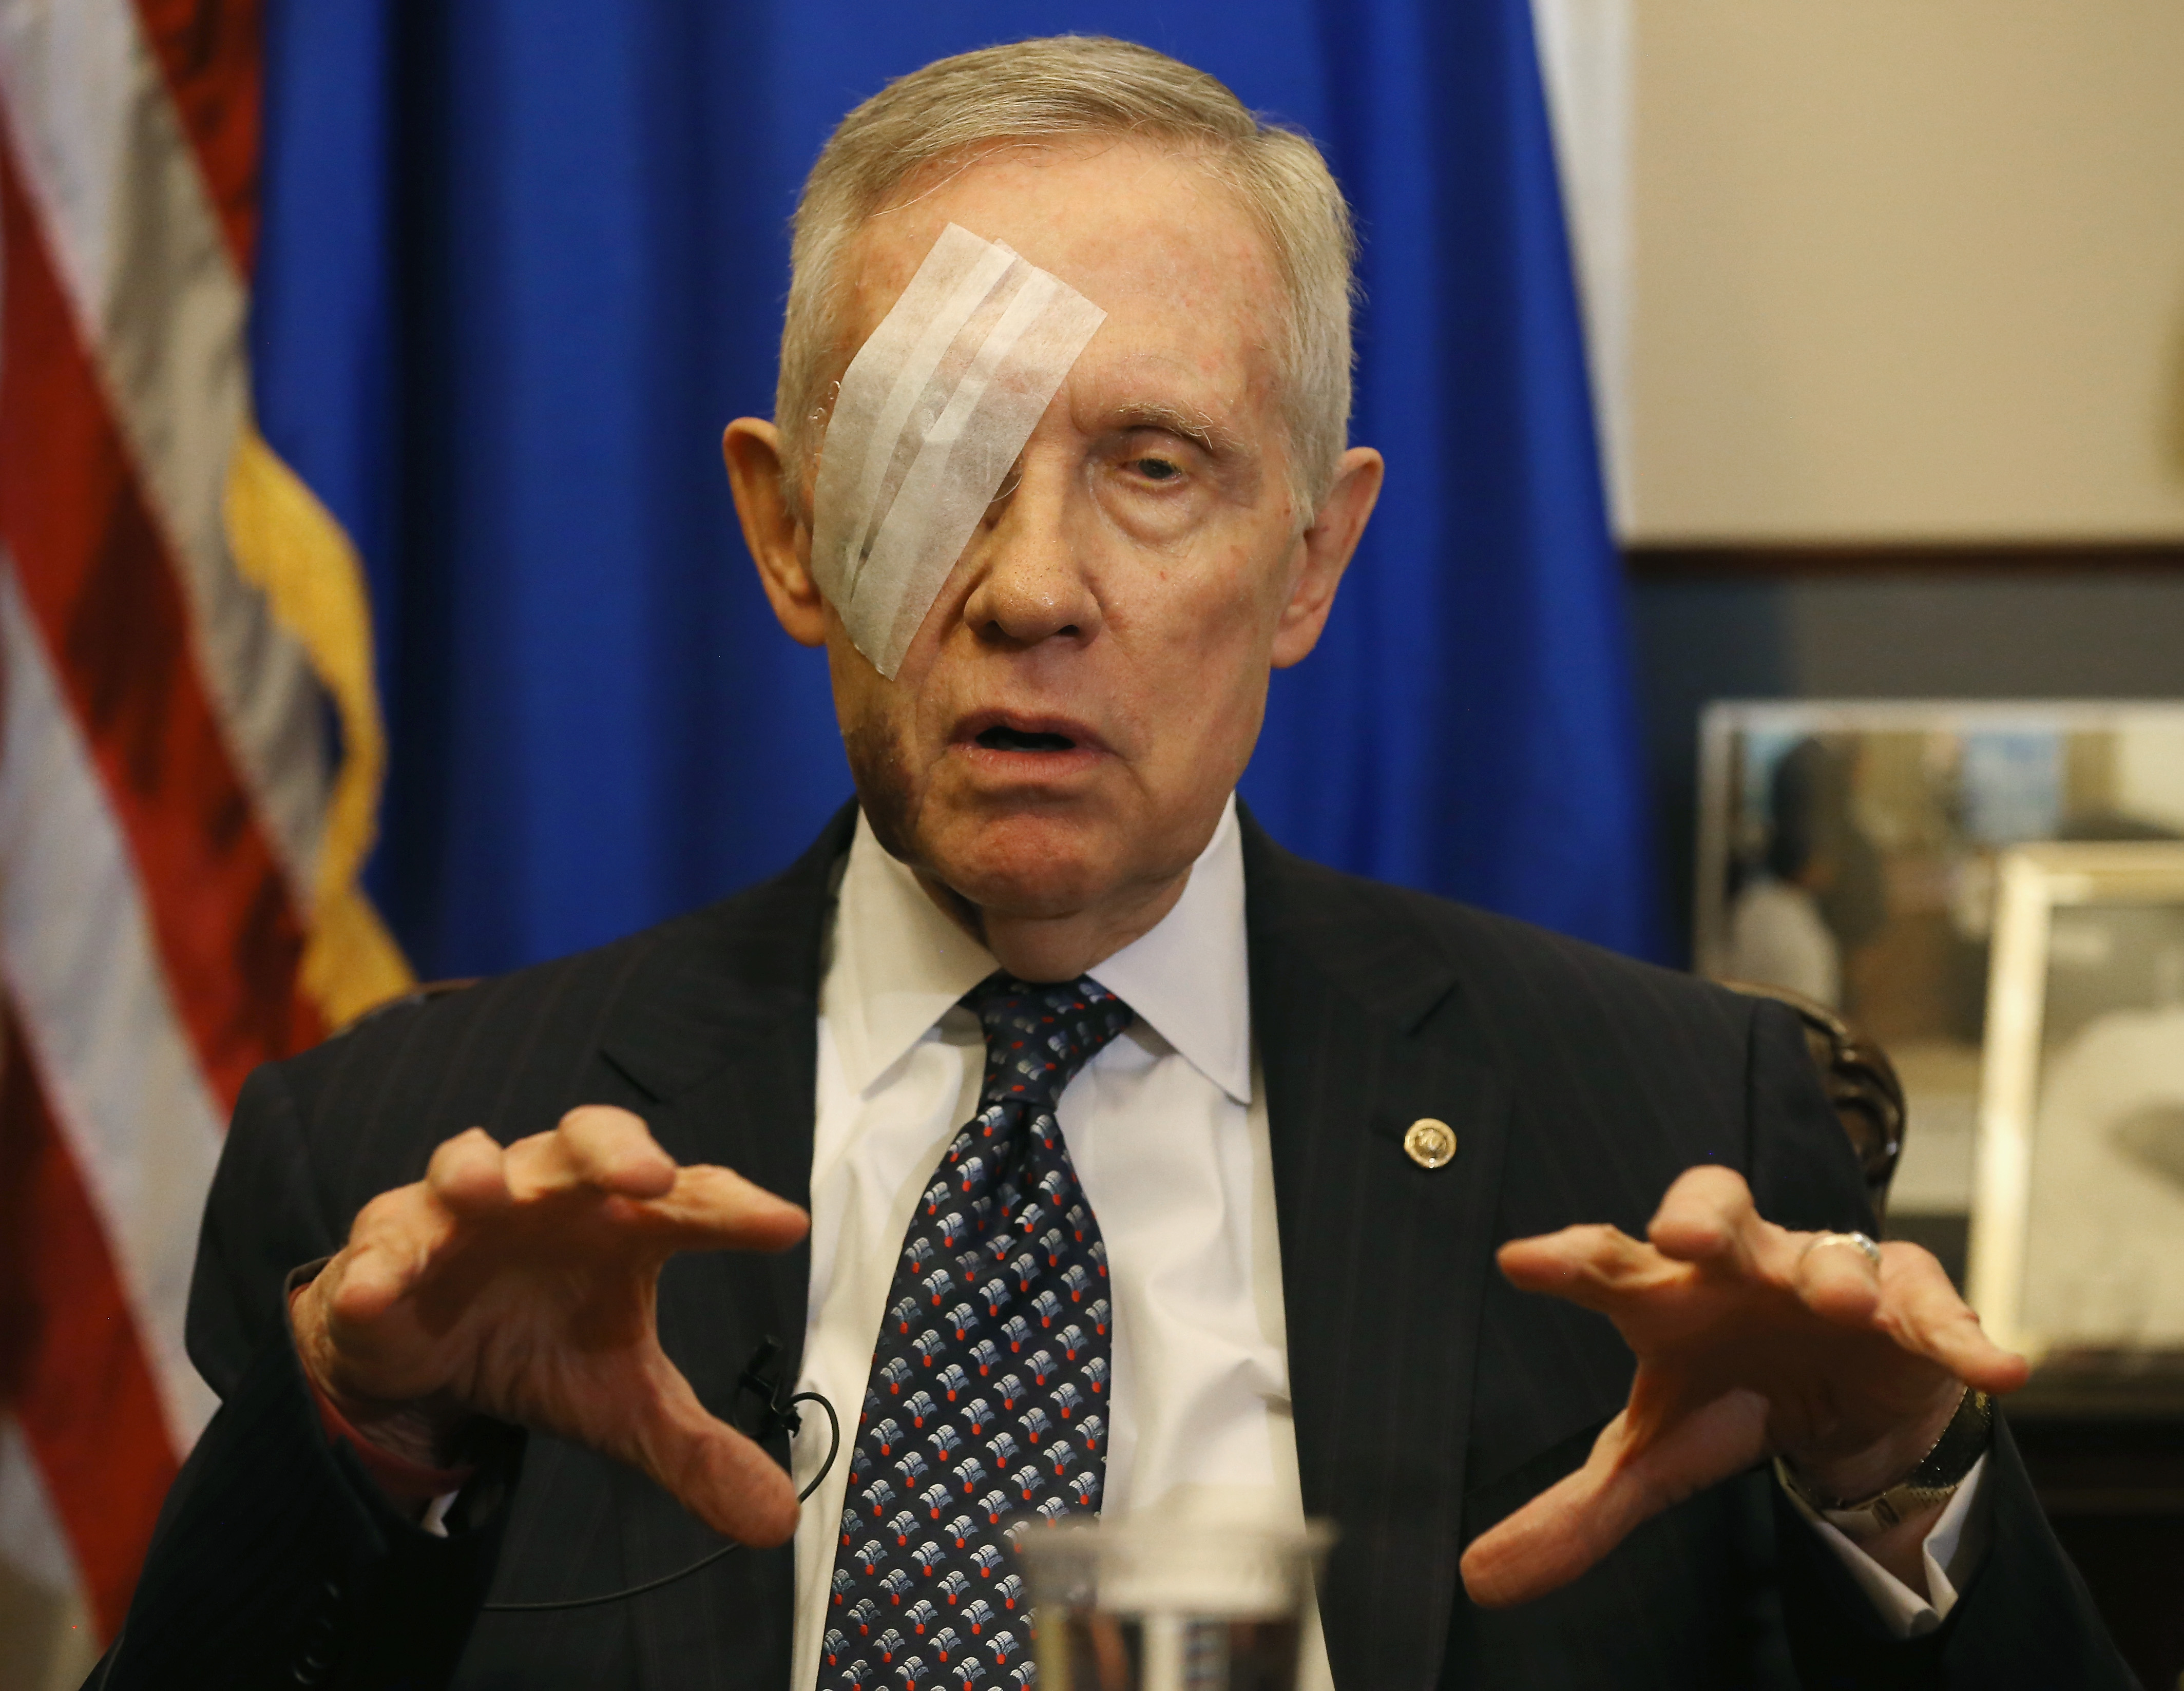 Harry Reid Holds Media Availability At The Capitol